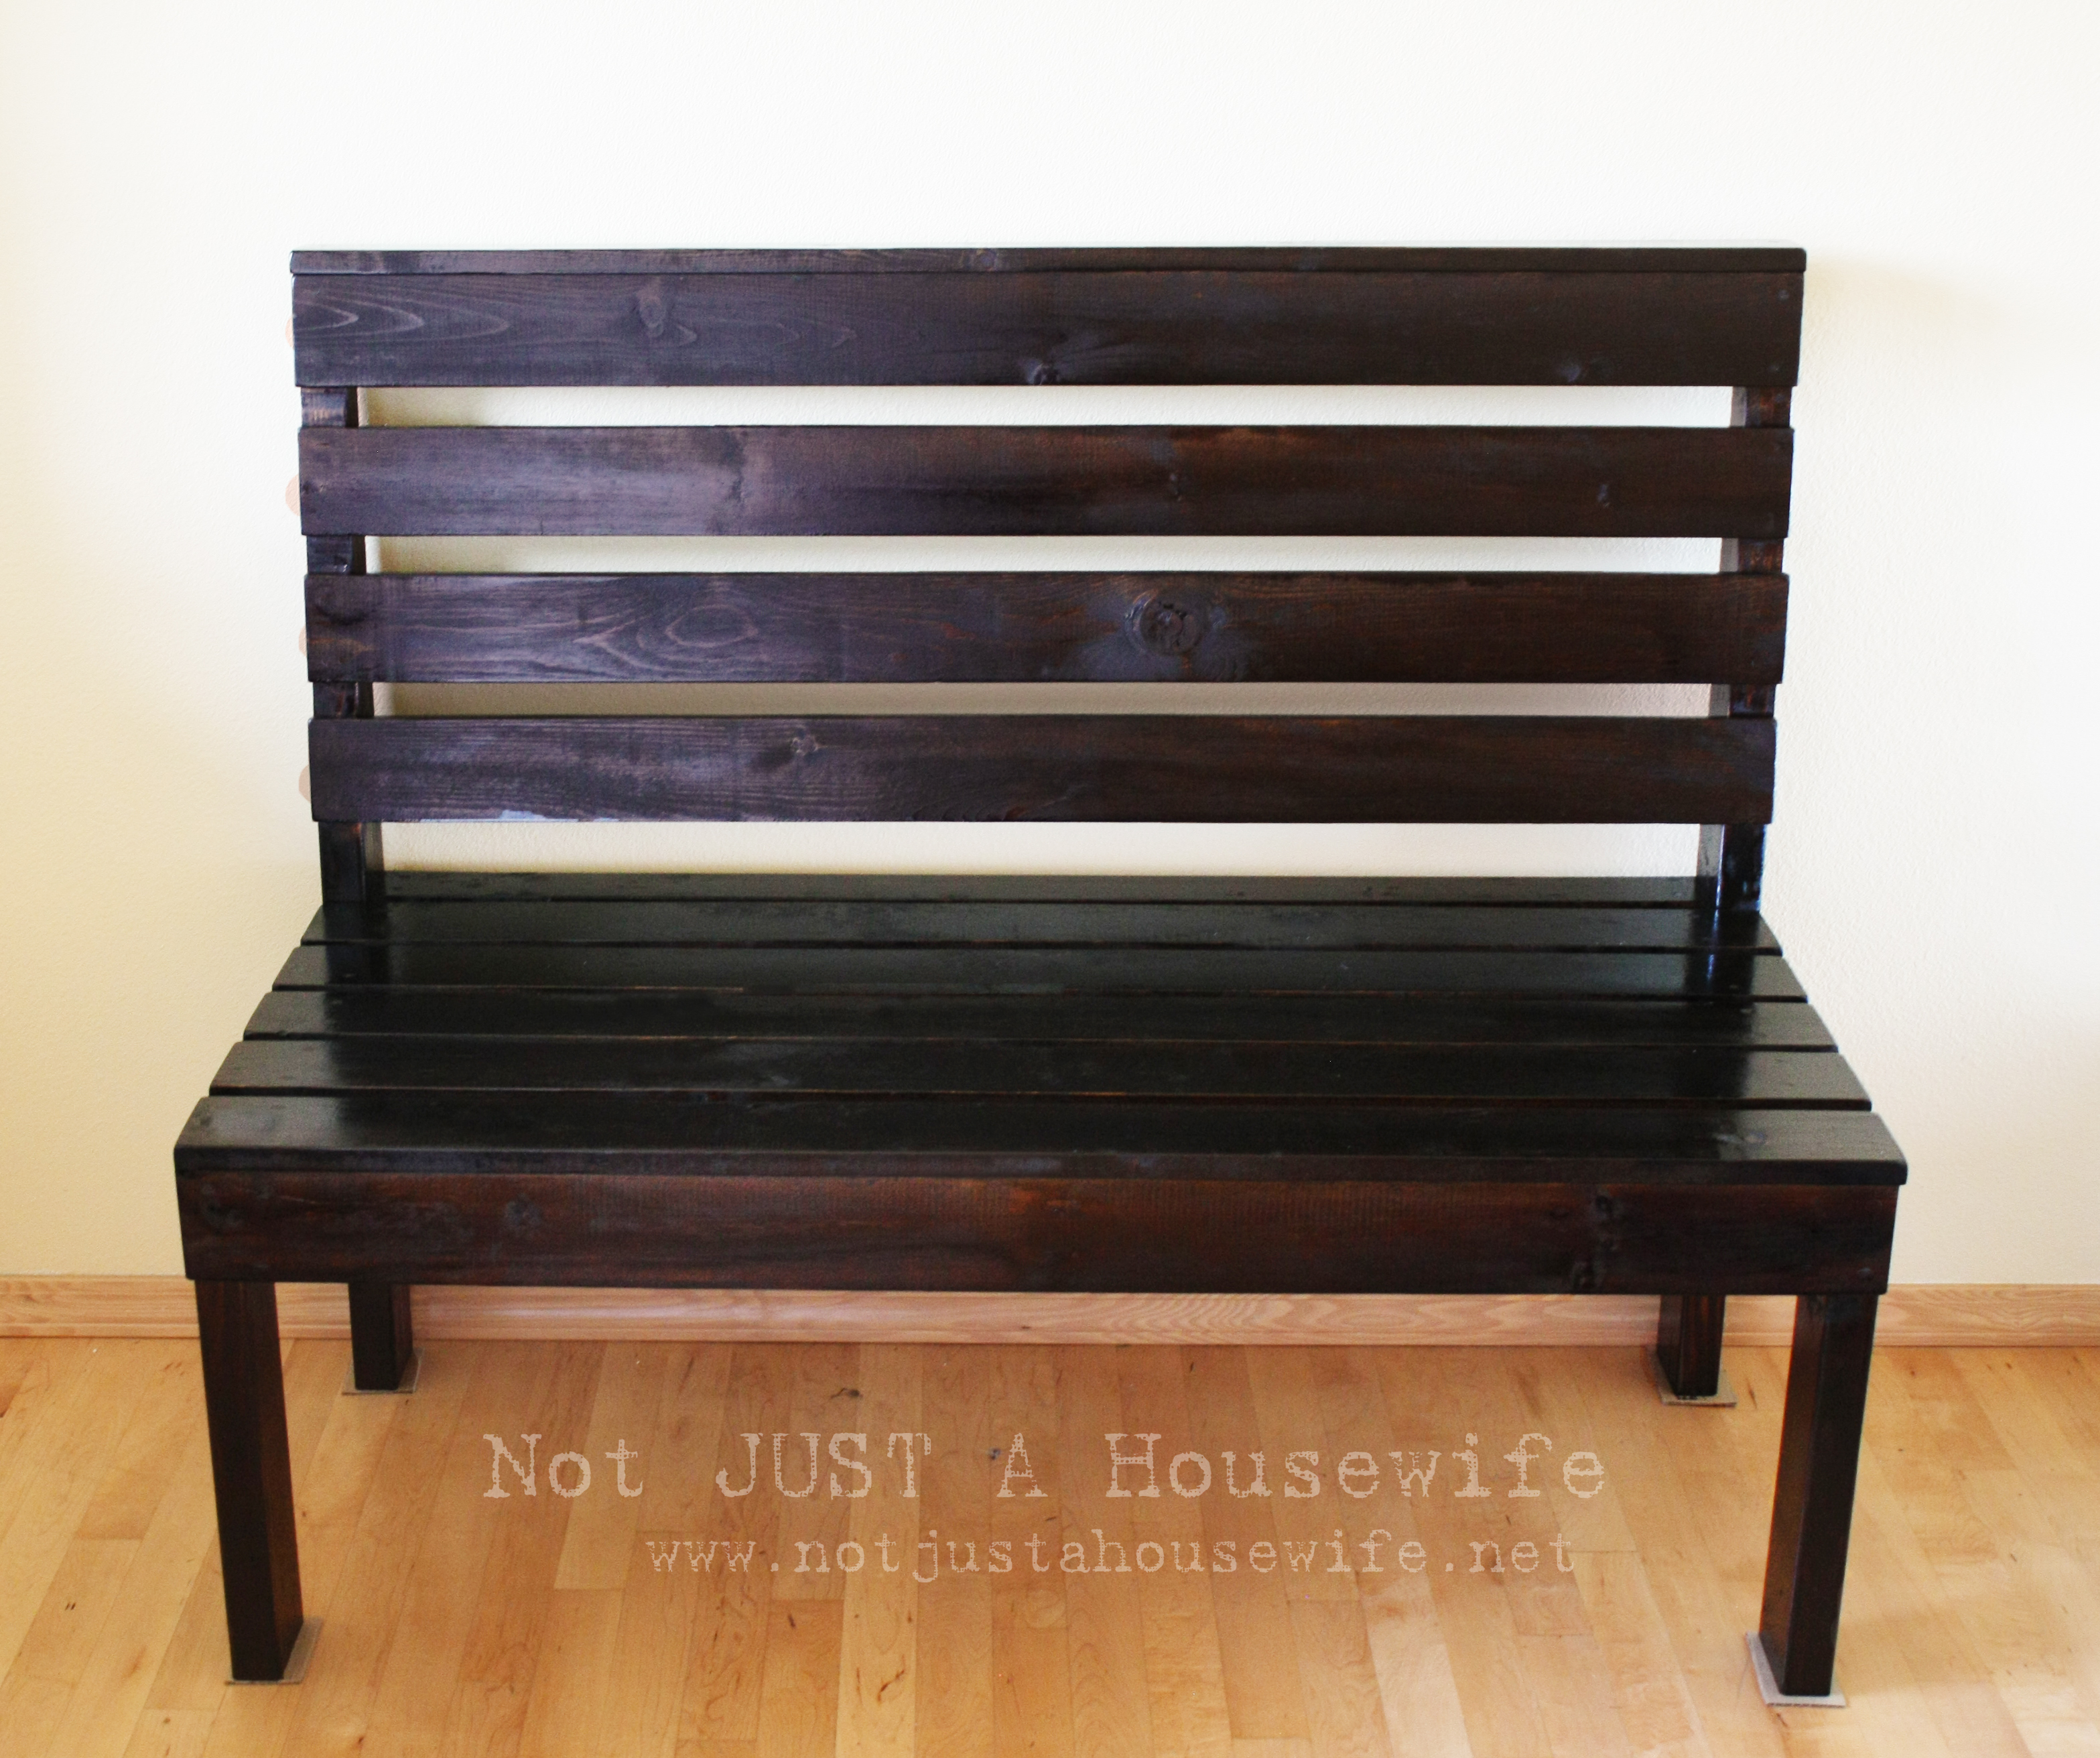 Decorating someone else’s house: Part 3 (building an entryway bench)